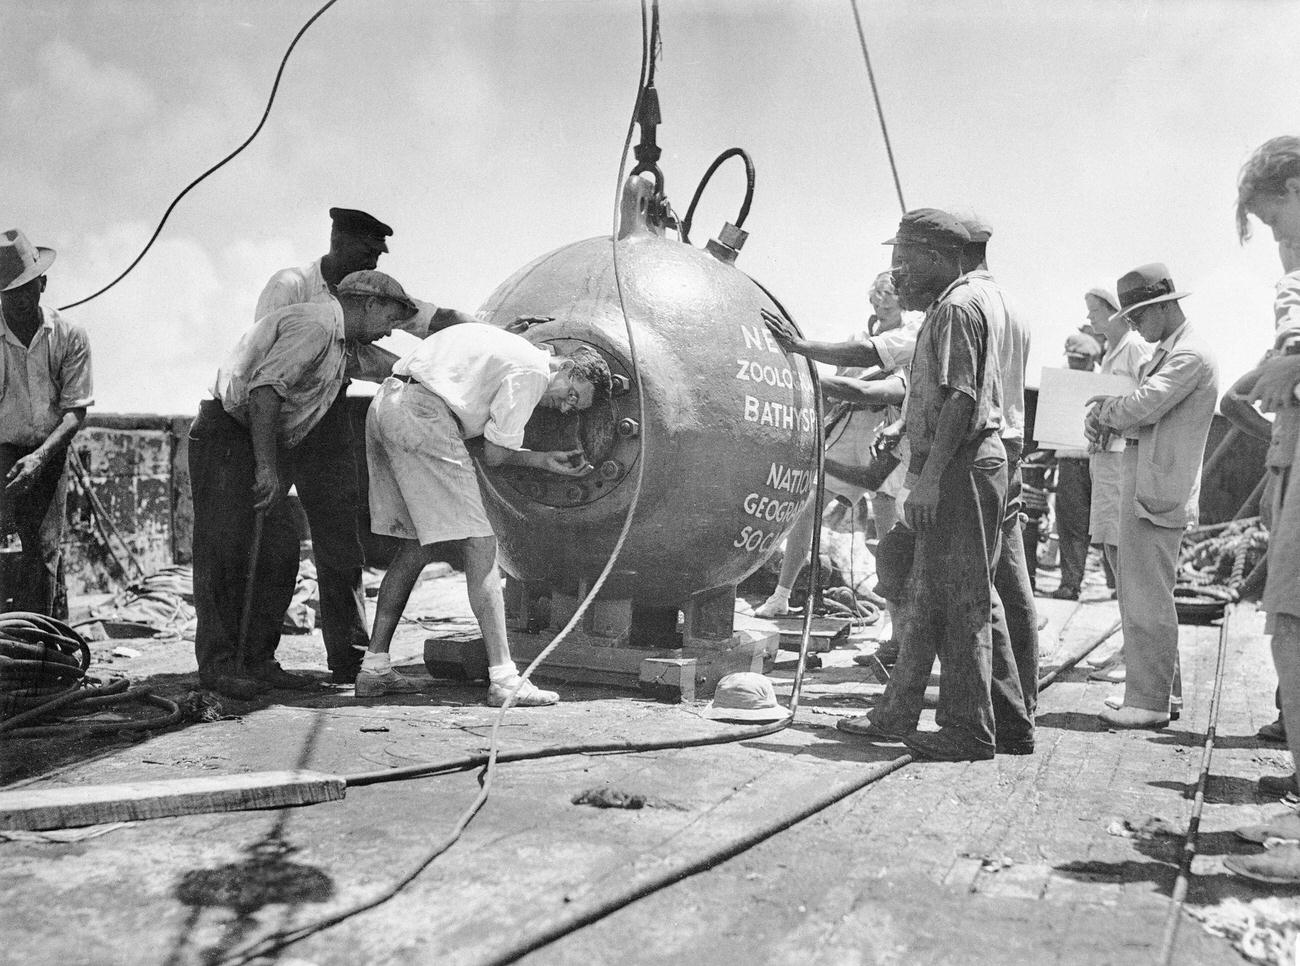 John Teevan opening the bathysphere used by William Beebe, Nonsuch Island, Bermuda, August 15th.